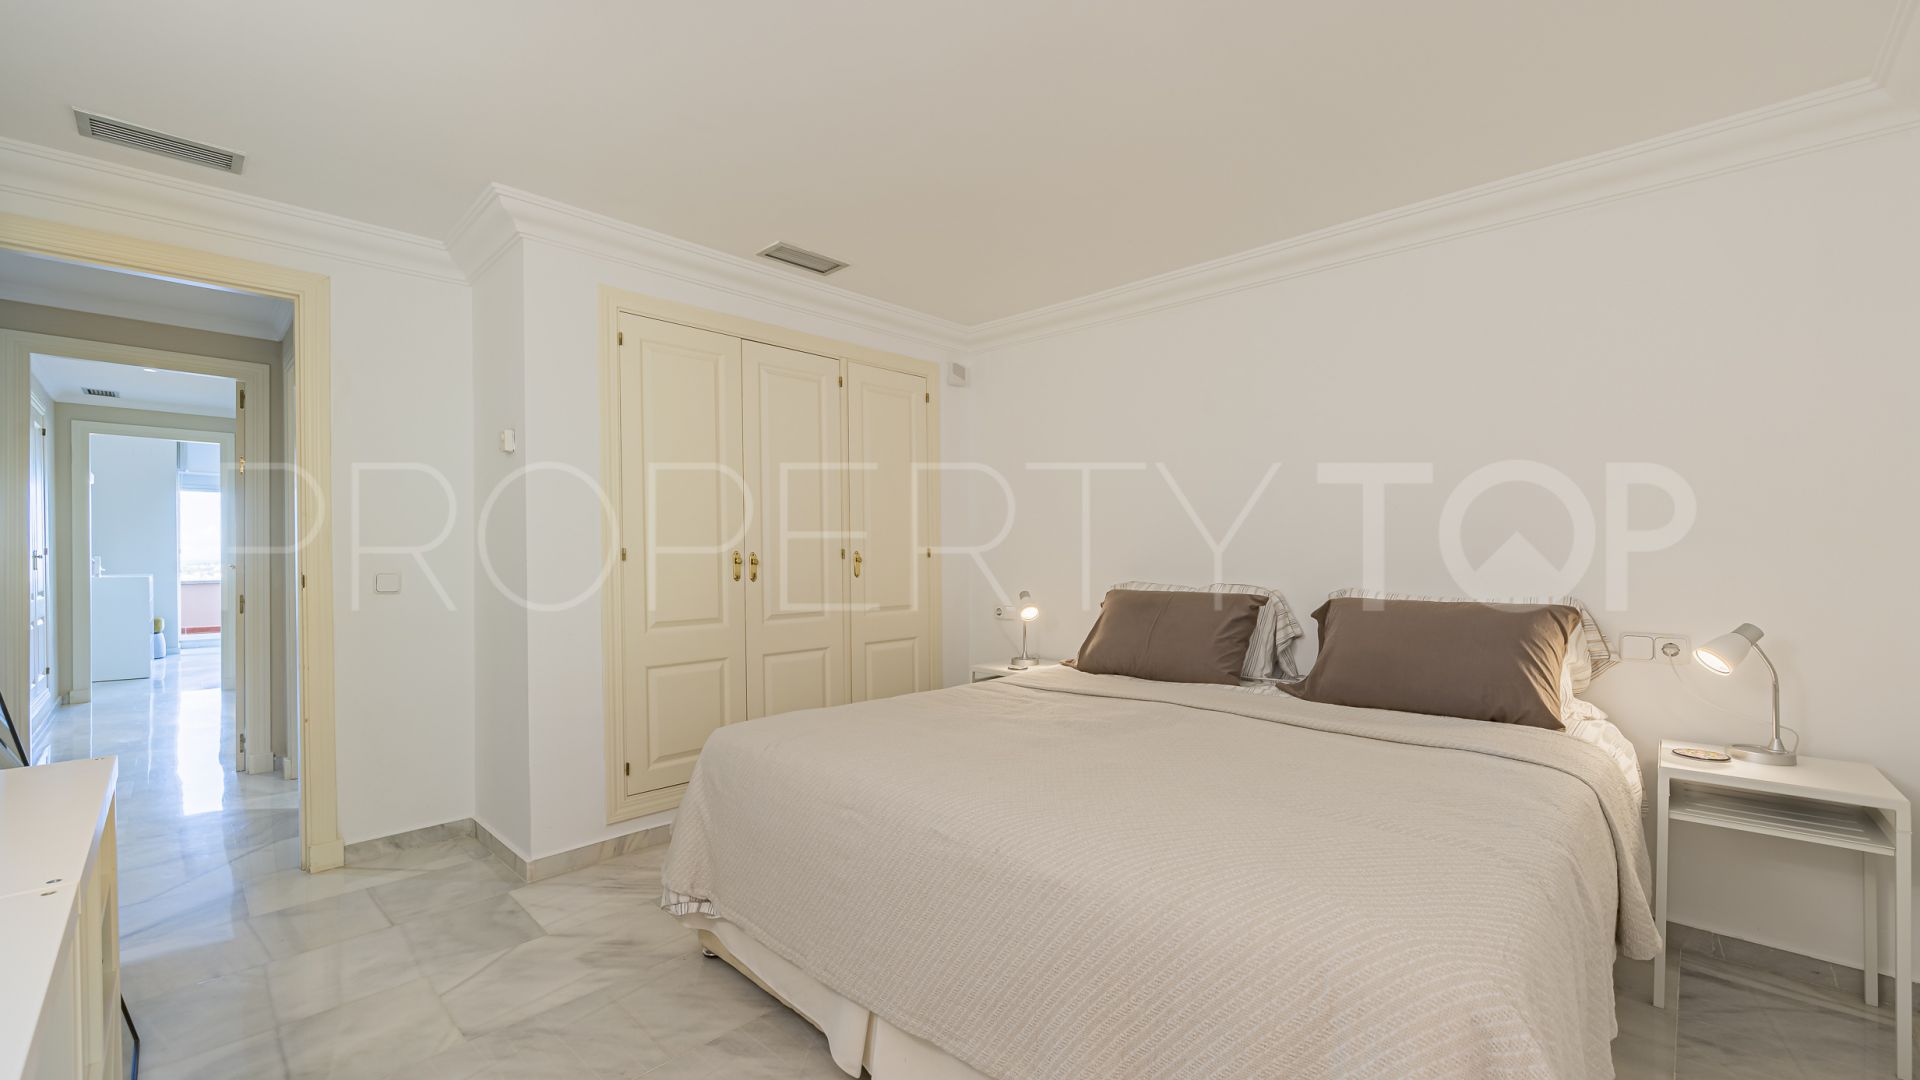 For sale Magna Marbella apartment with 2 bedrooms